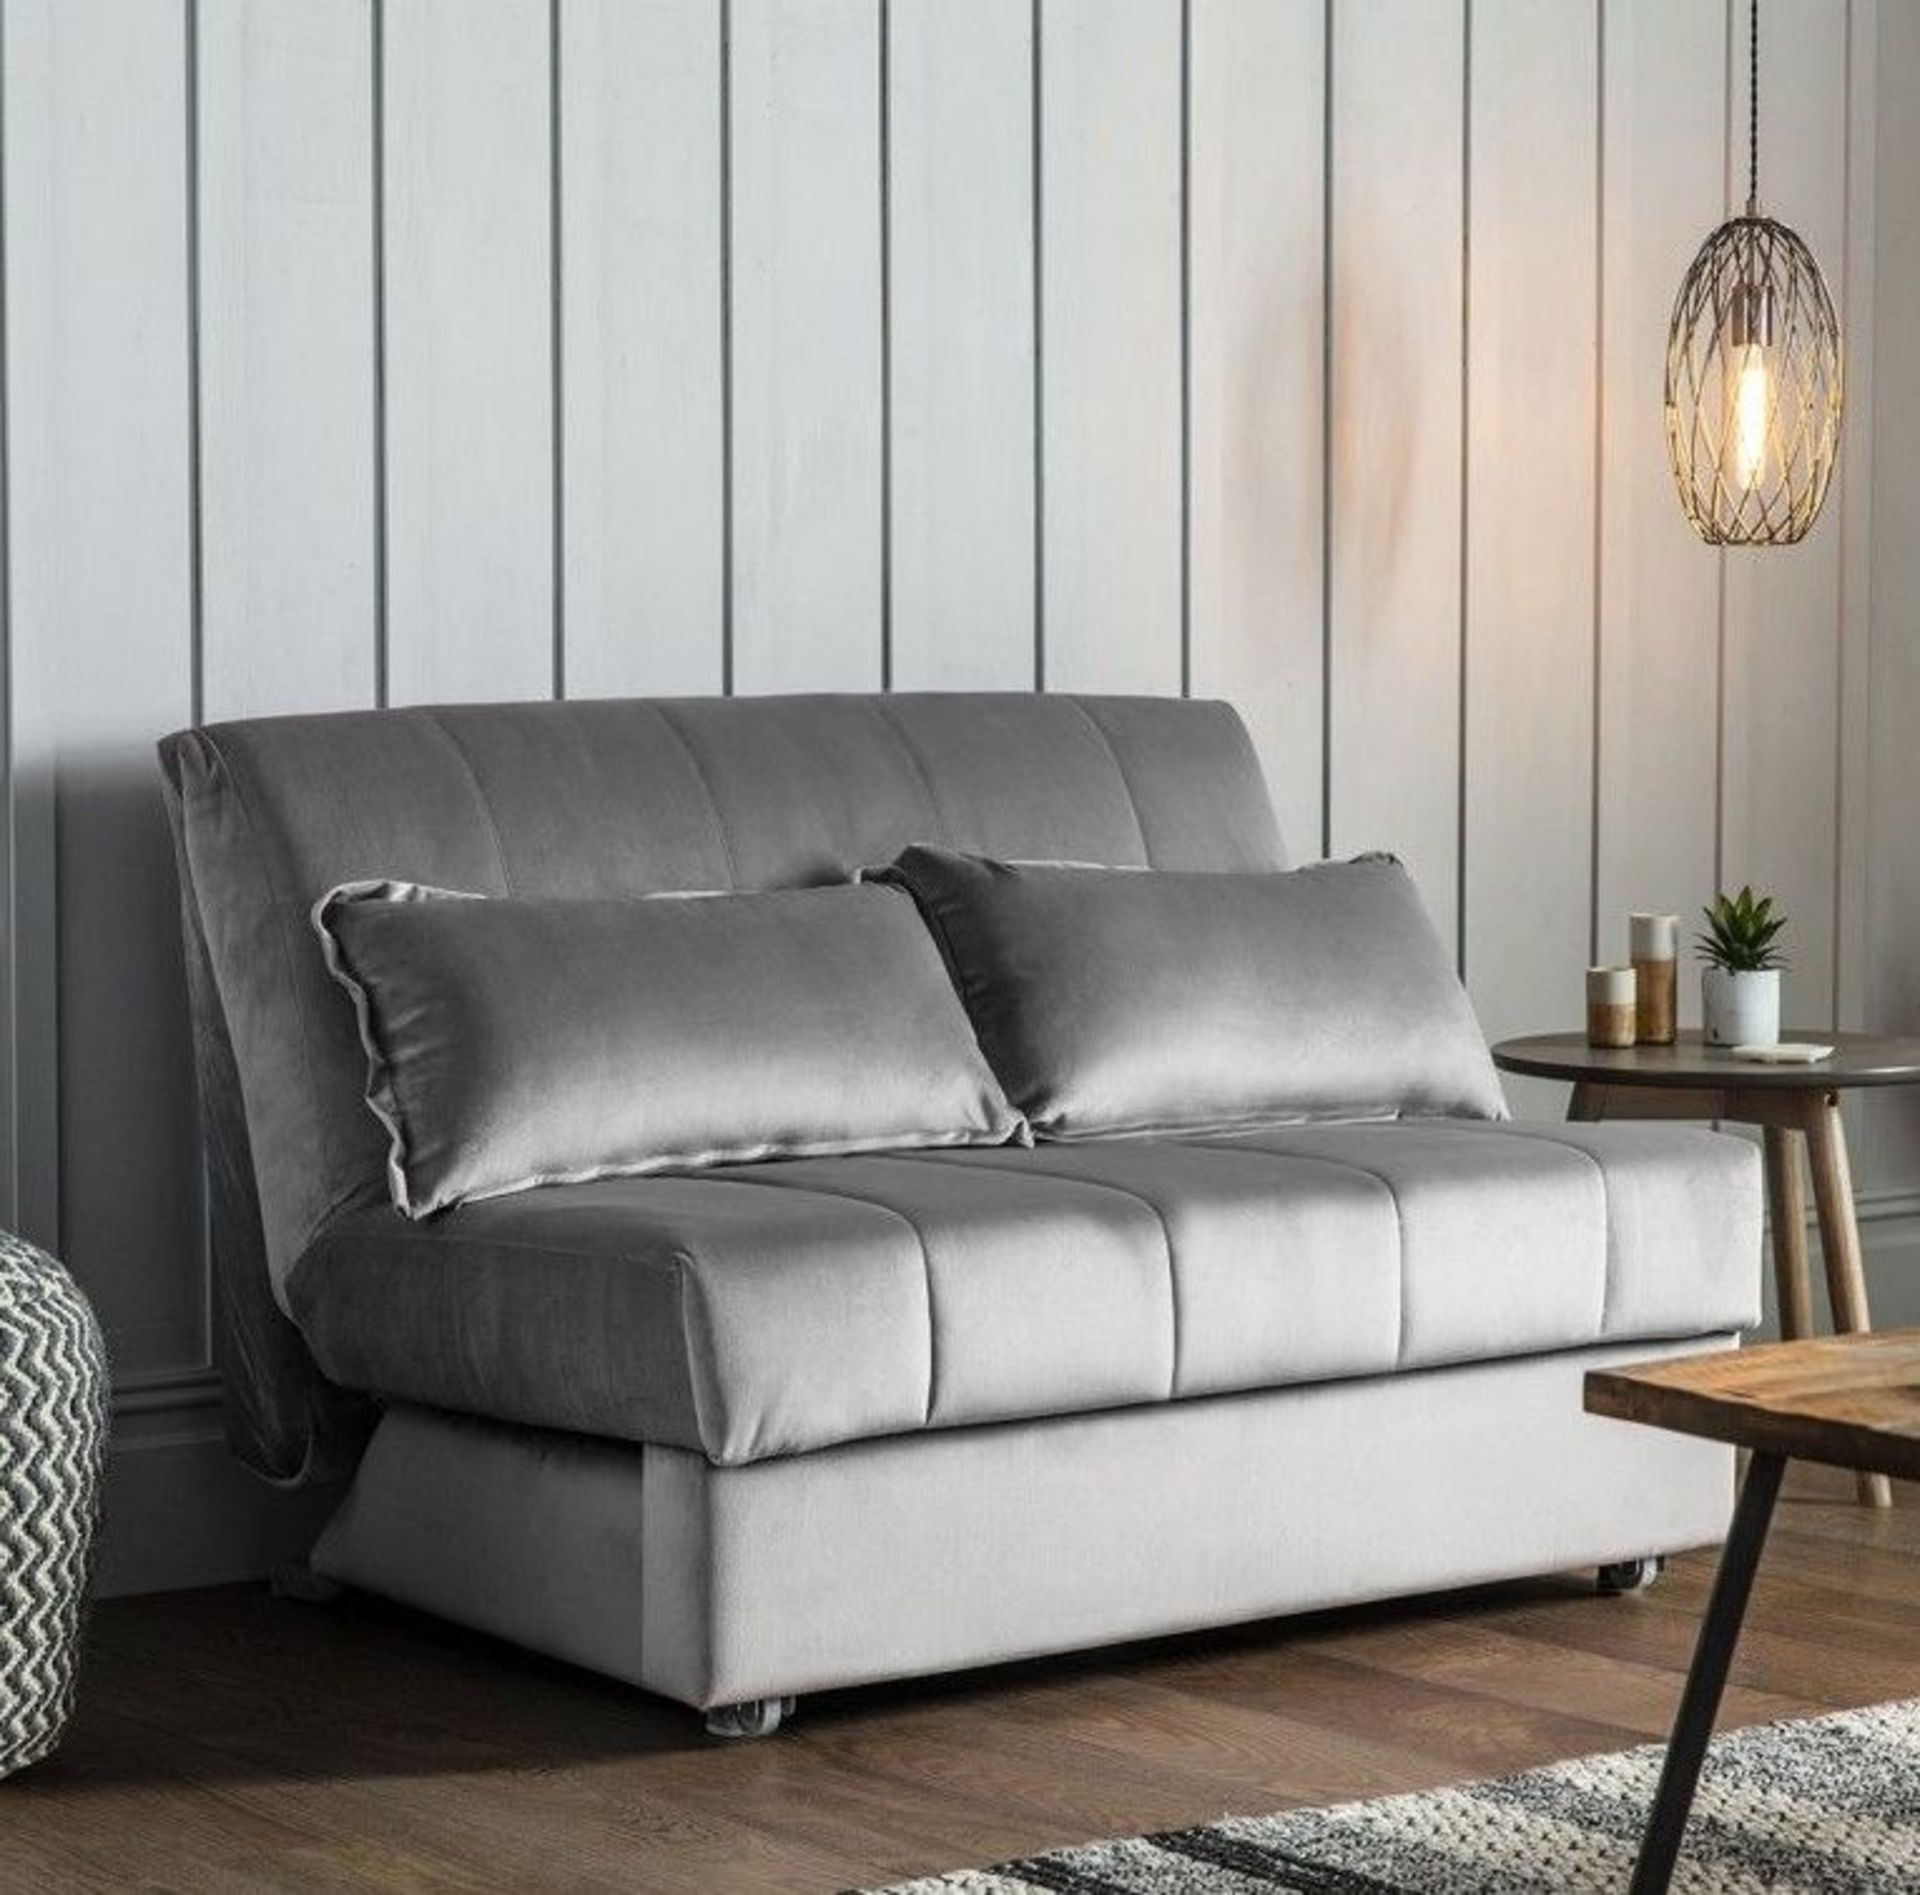 Metz Sofa 140cm Monza Steel Upholstered The Metz collection is ideal even for smaller spaces,